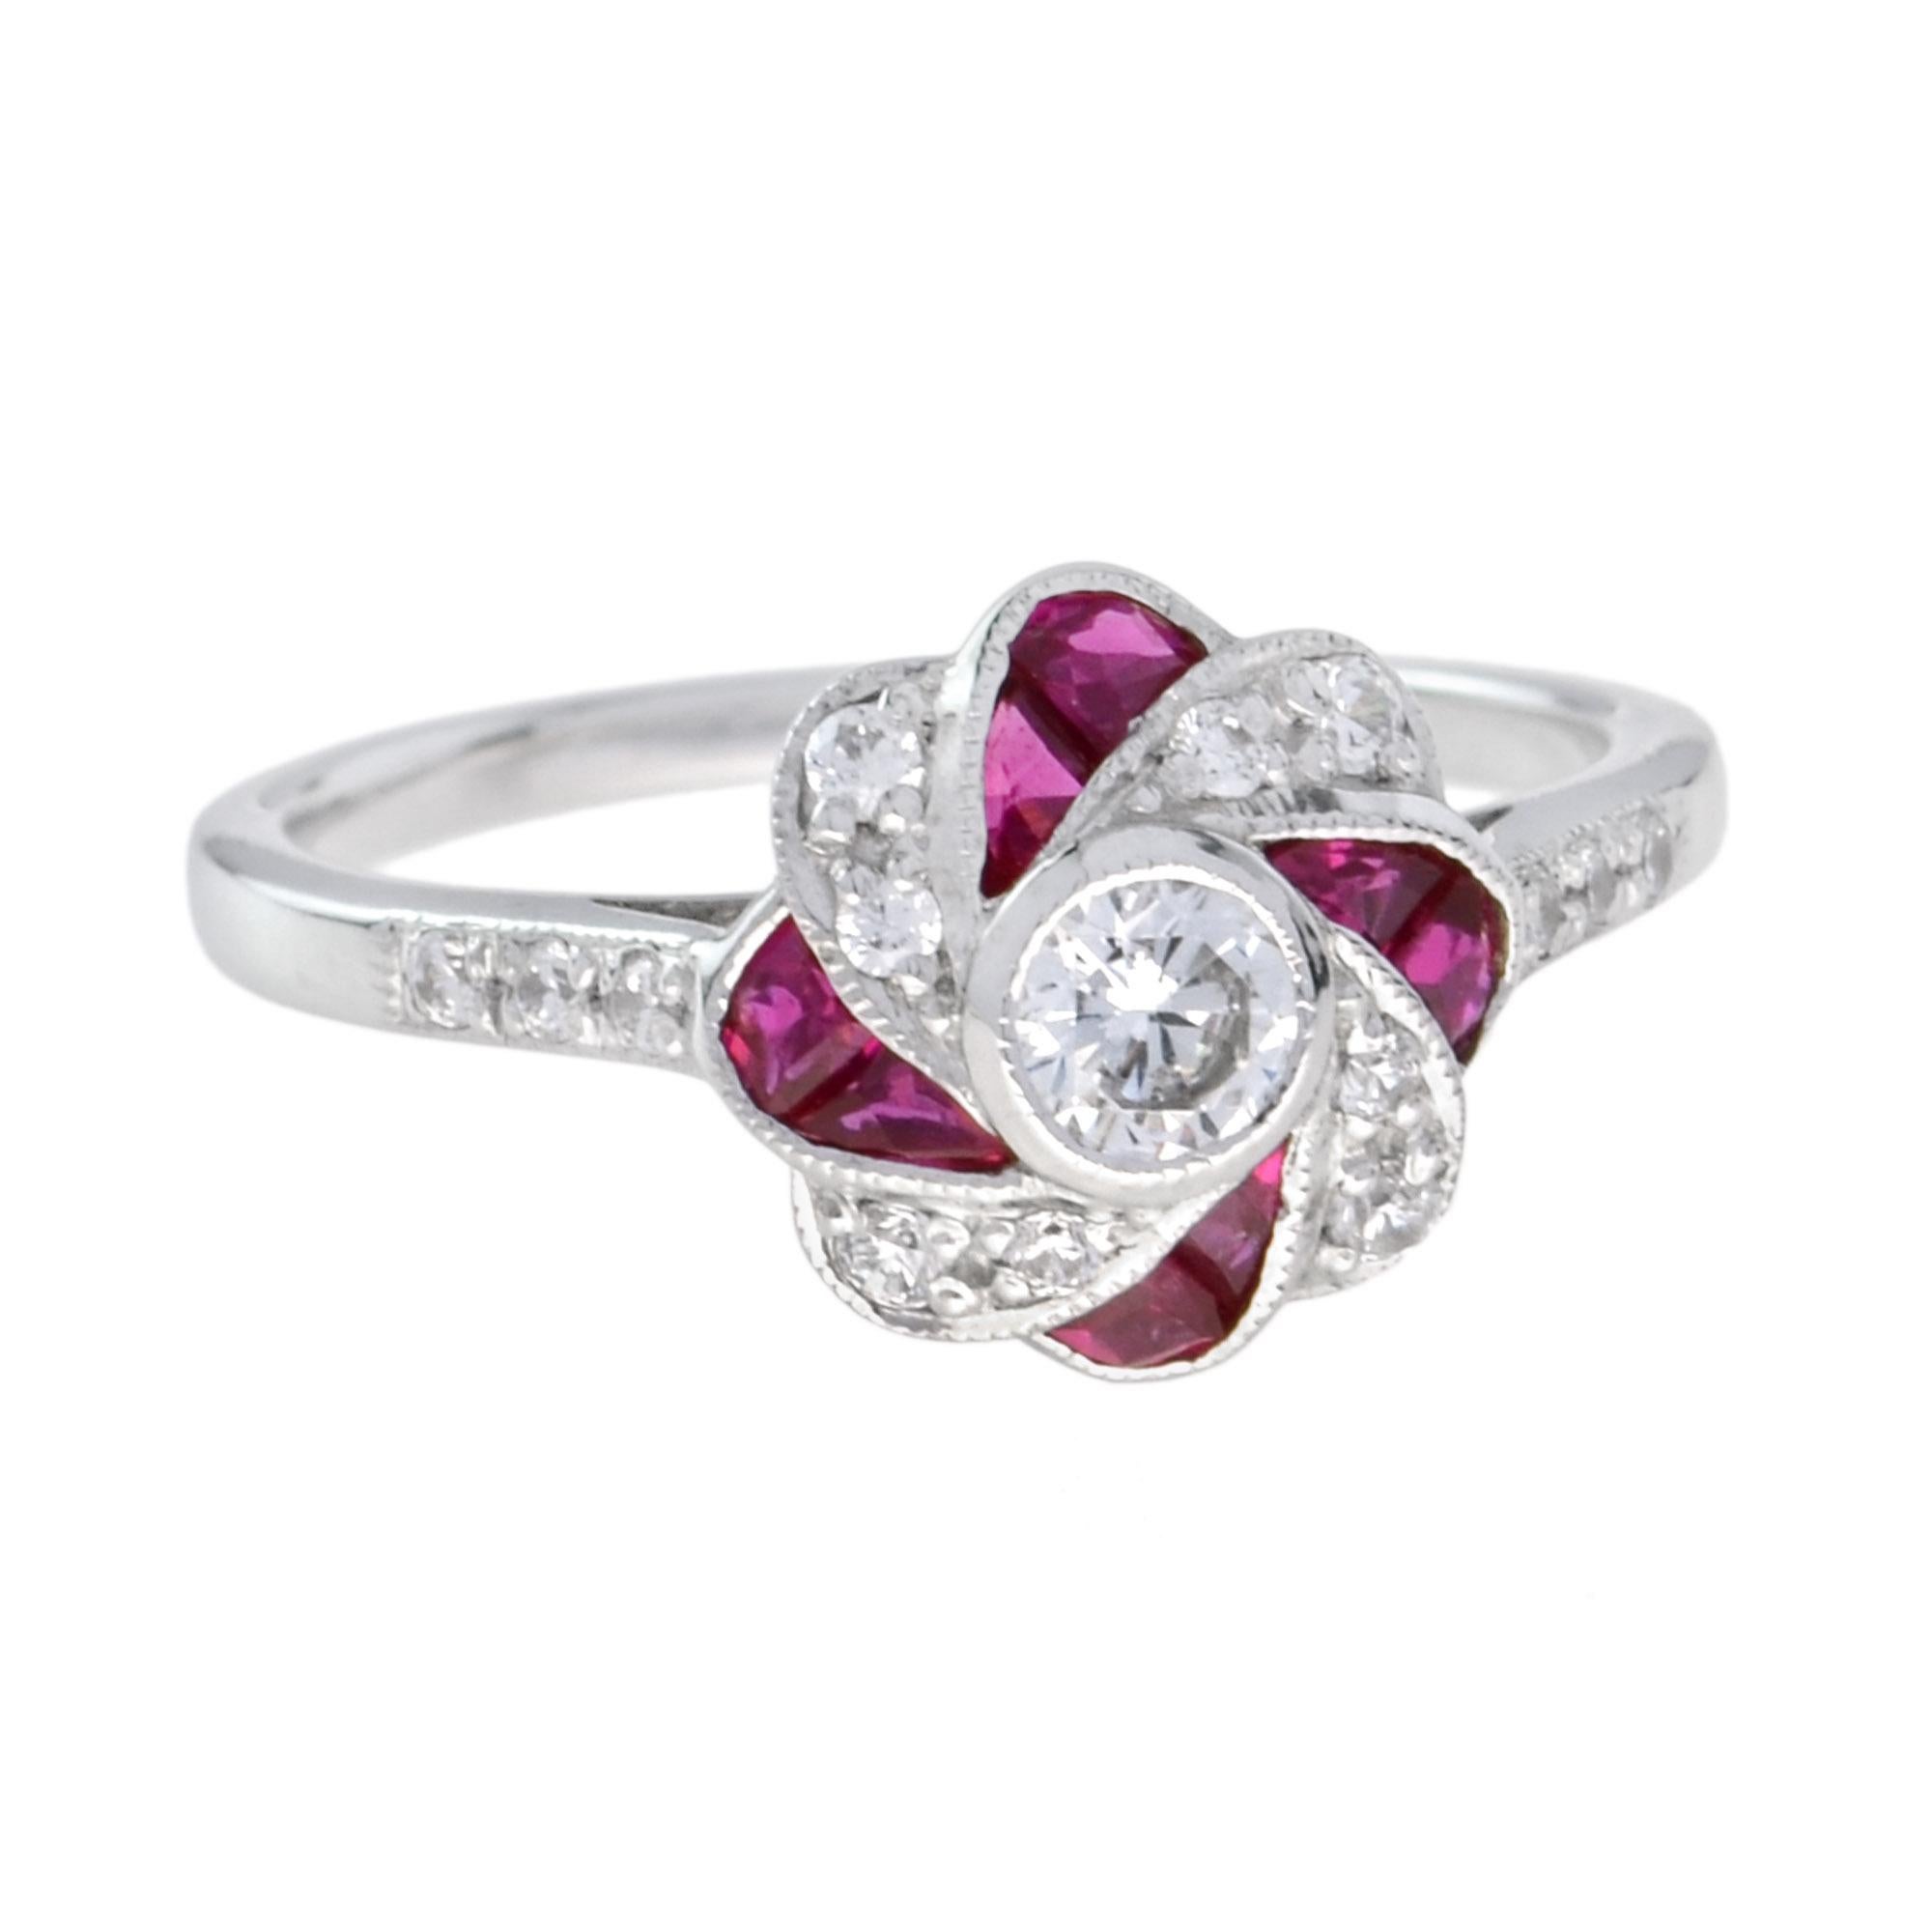 For Sale:  Art Deco Style Diamond and Ruby Floral Engagement Ring in 18K White Gold 3